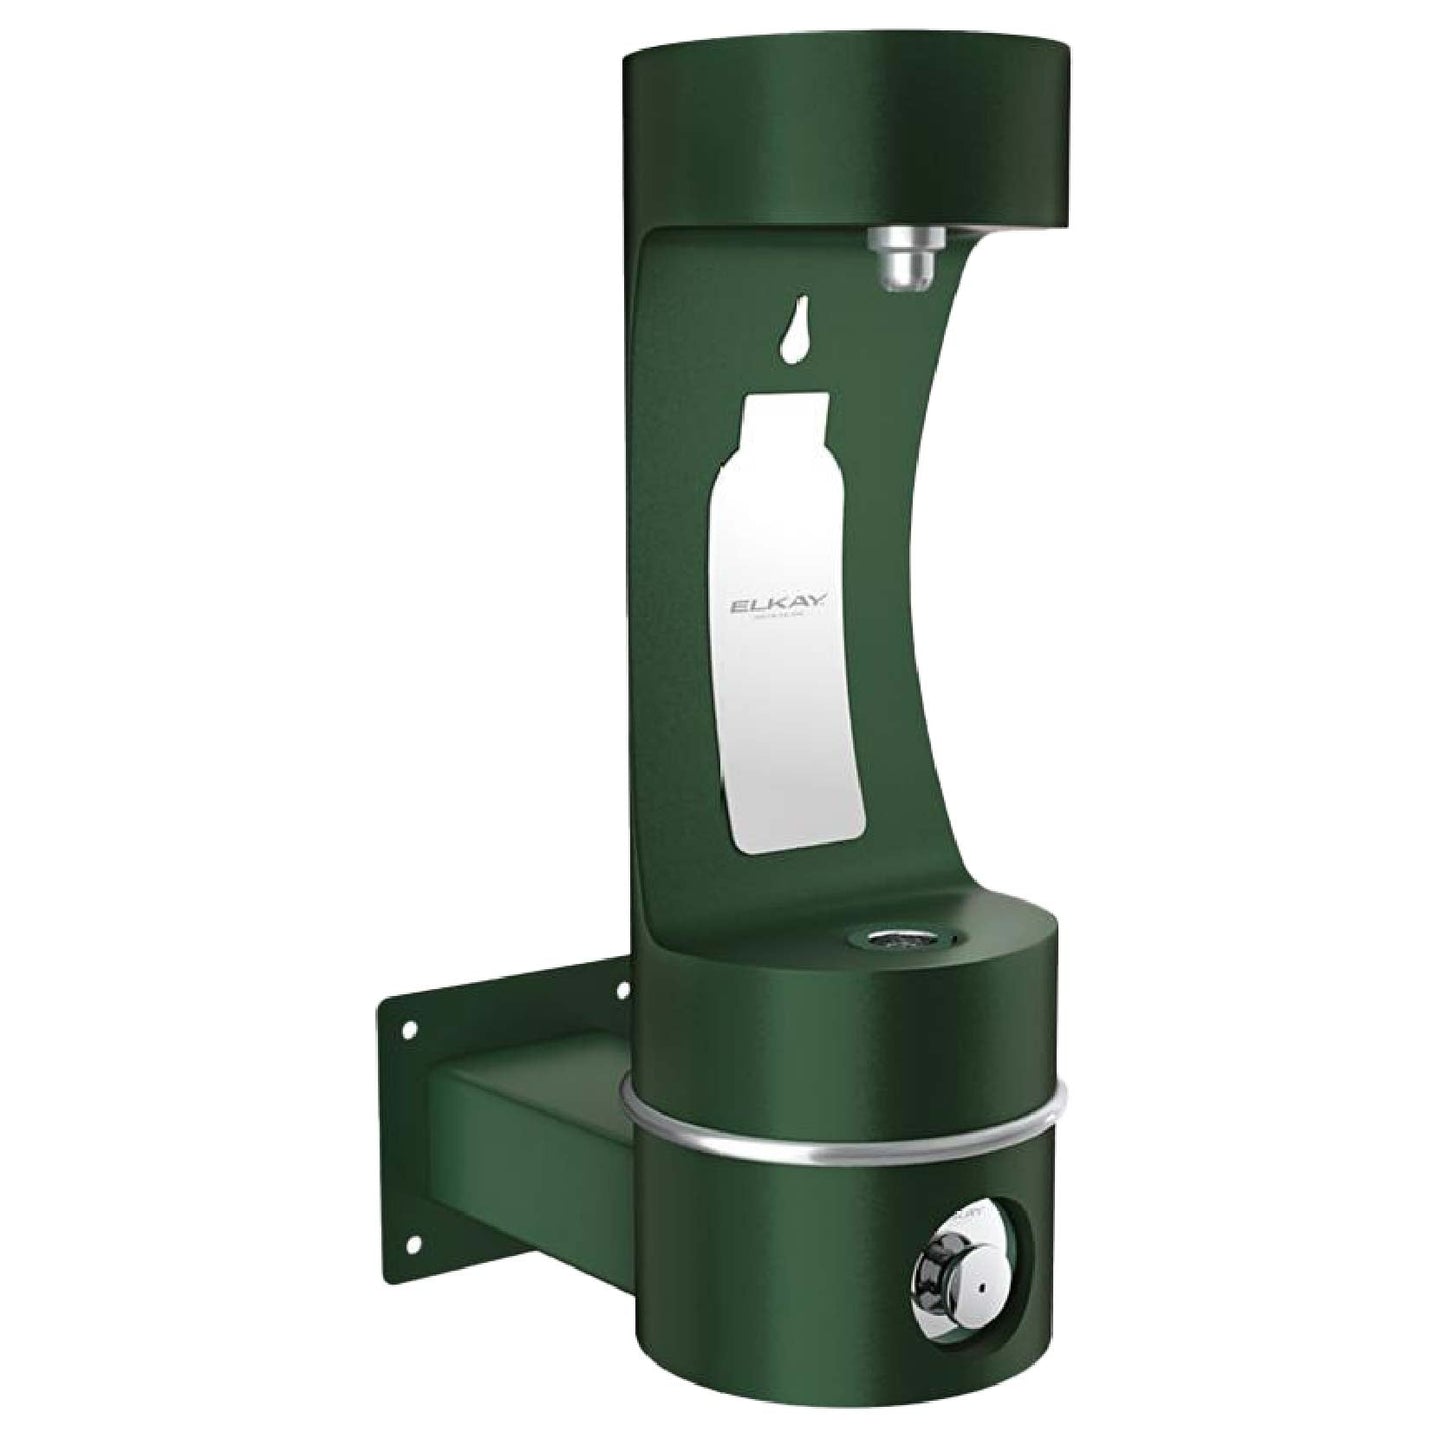 Elkay Outdoor ezH2O Single Arm Bottle Filling Station LK4405BF - Wall Mount Non-Filtered Non-Refrigerated